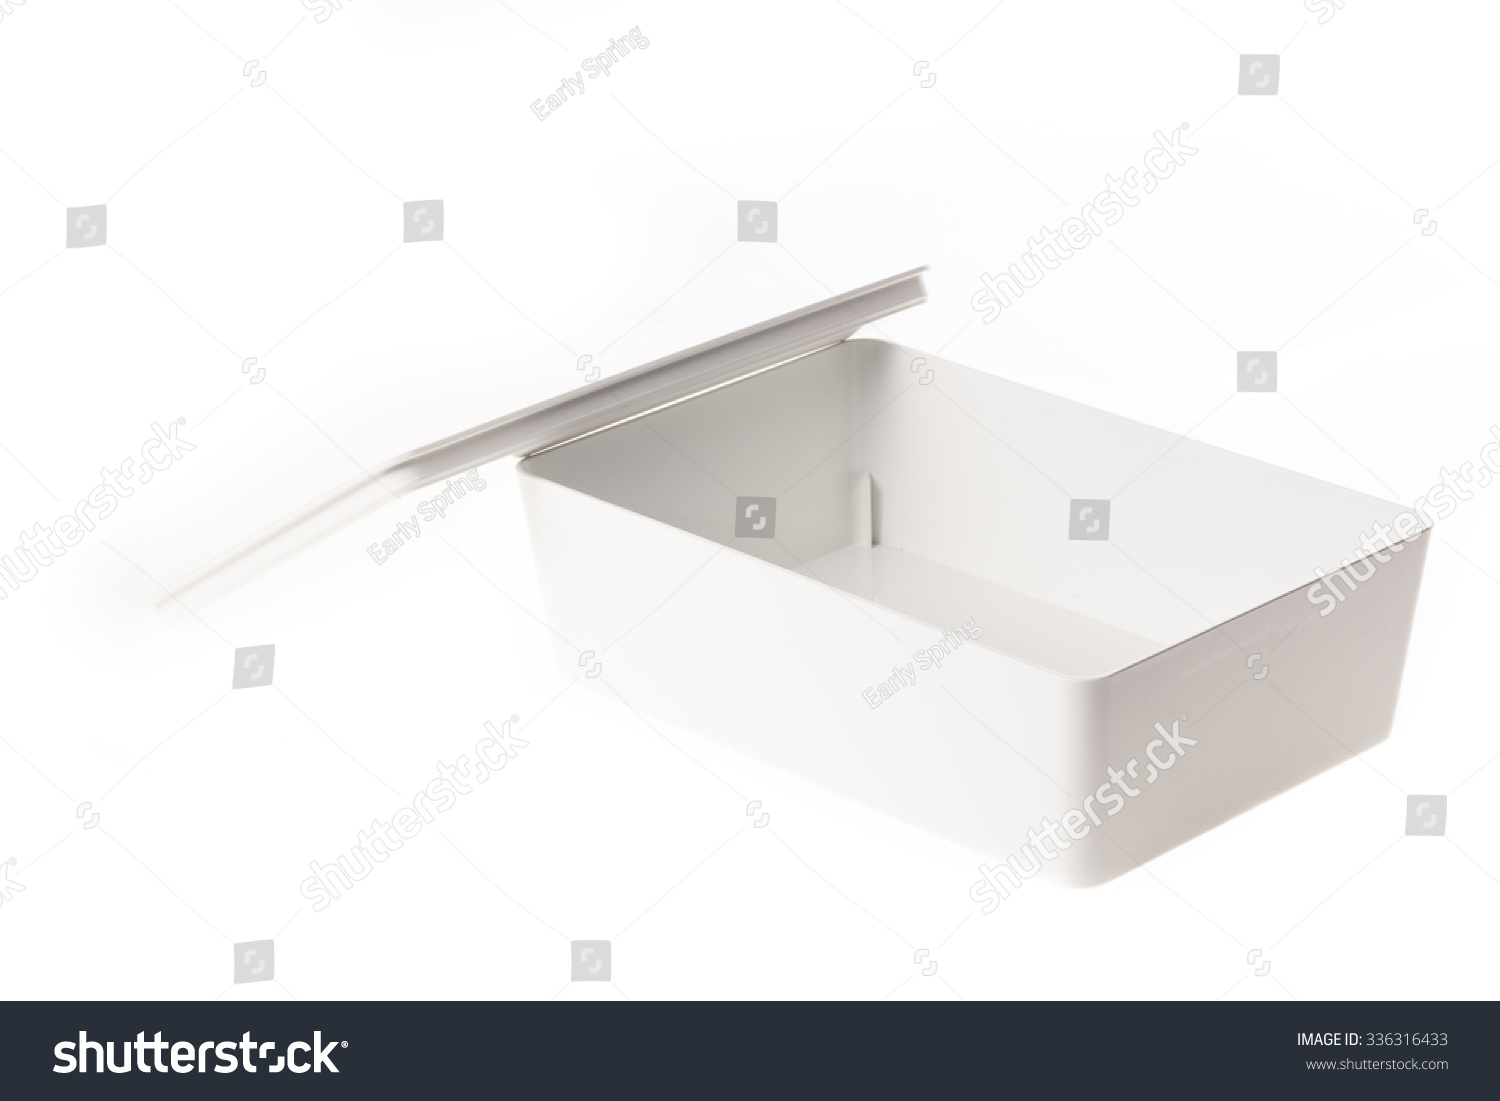 White Plastic Box Lid Emptyblink Container Stock Photo 336316433